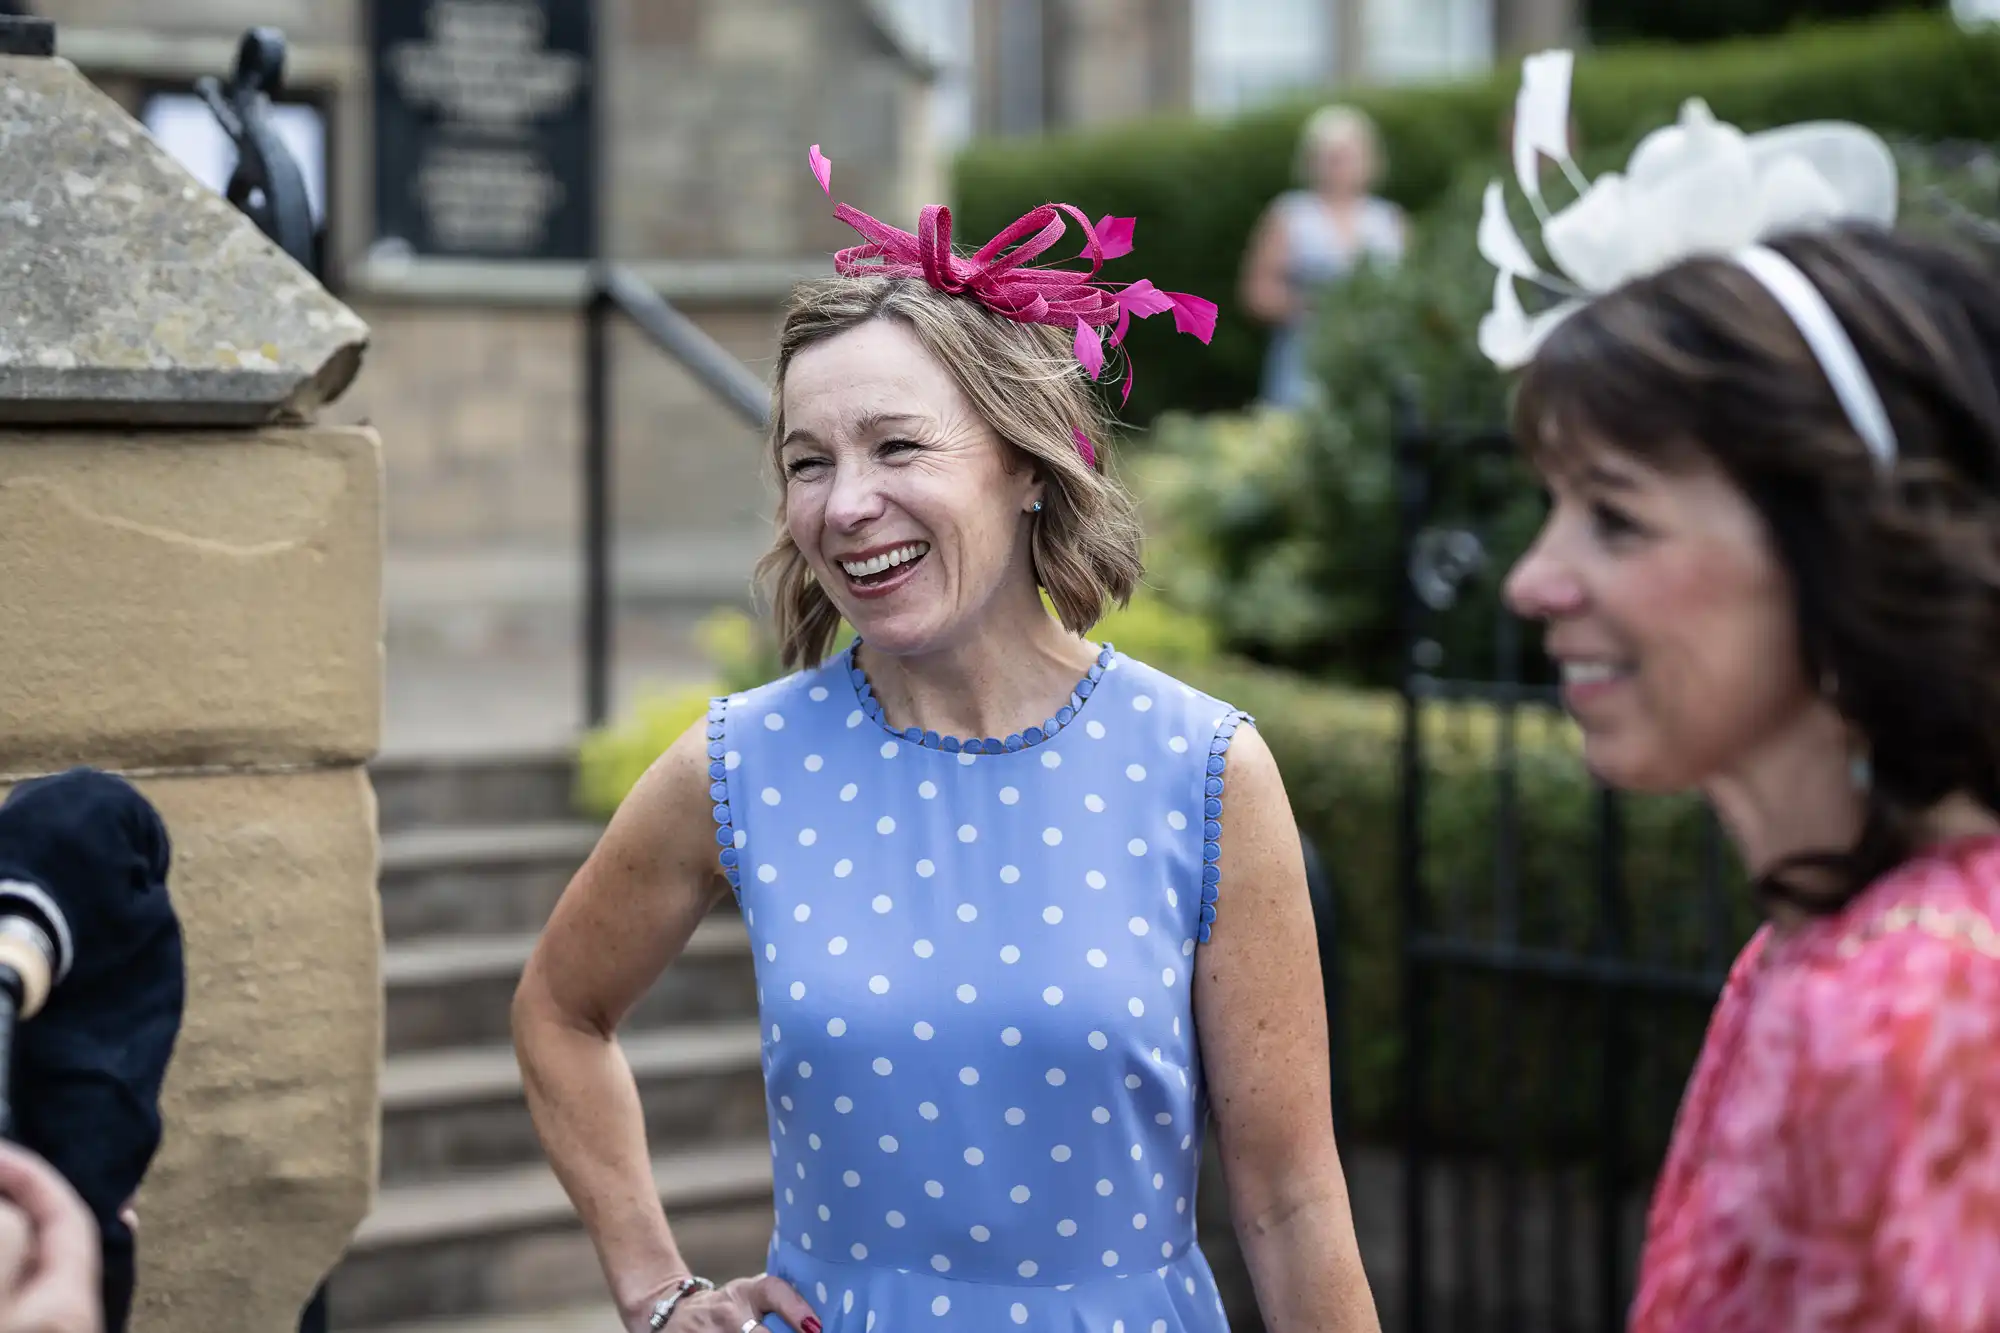 A woman in a blue polka dot dress and a pink fascinator laughs joyfully at a social gathering, accompanied by another woman in a white hat.